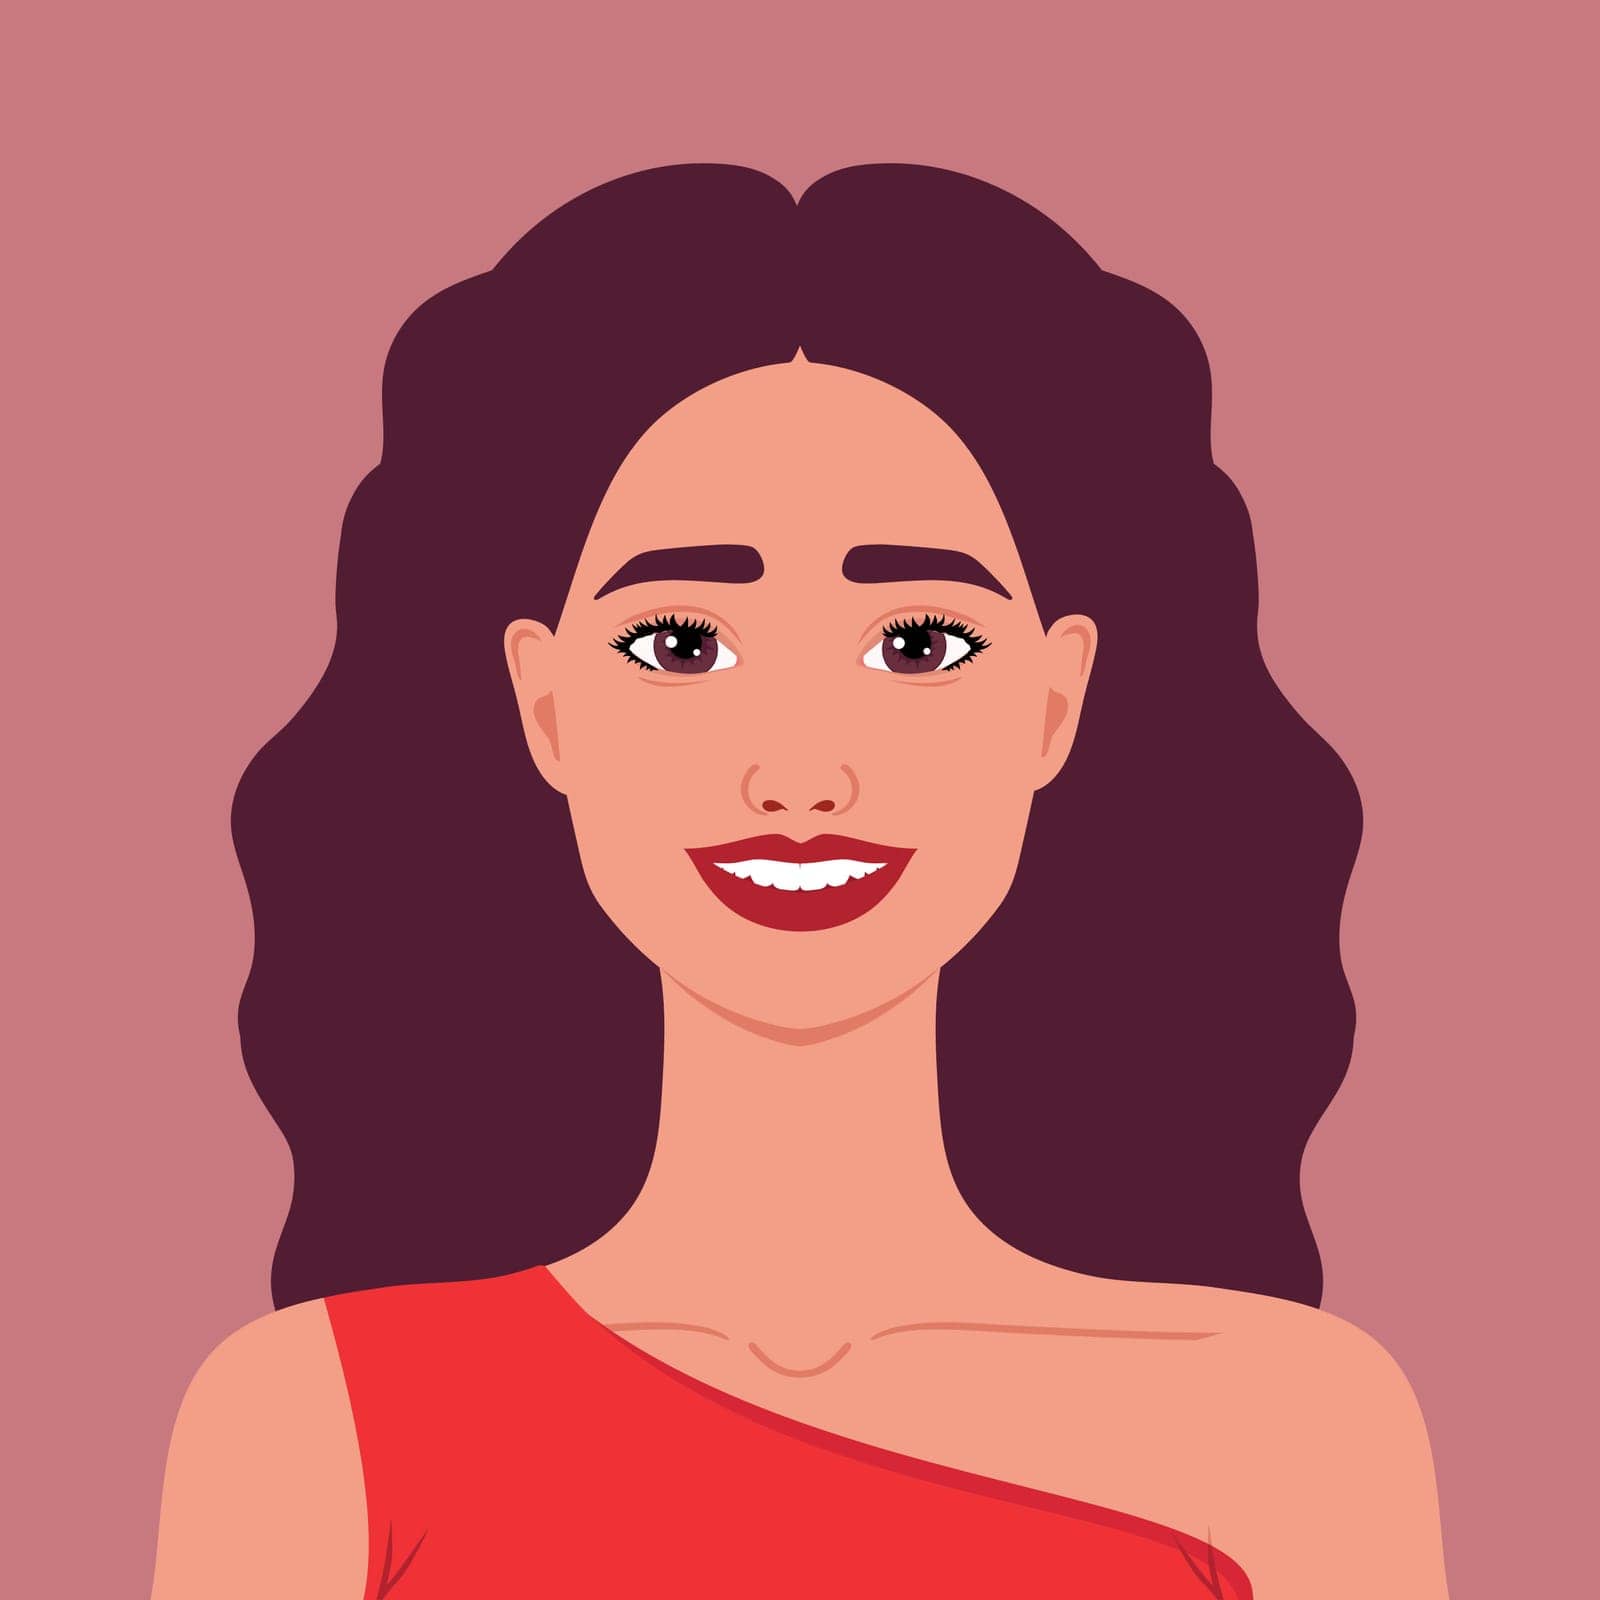 Beautiful smiling woman in red dress. Portrait or an avatar of a pretty and cheerful female. Vector illustration by psychoche